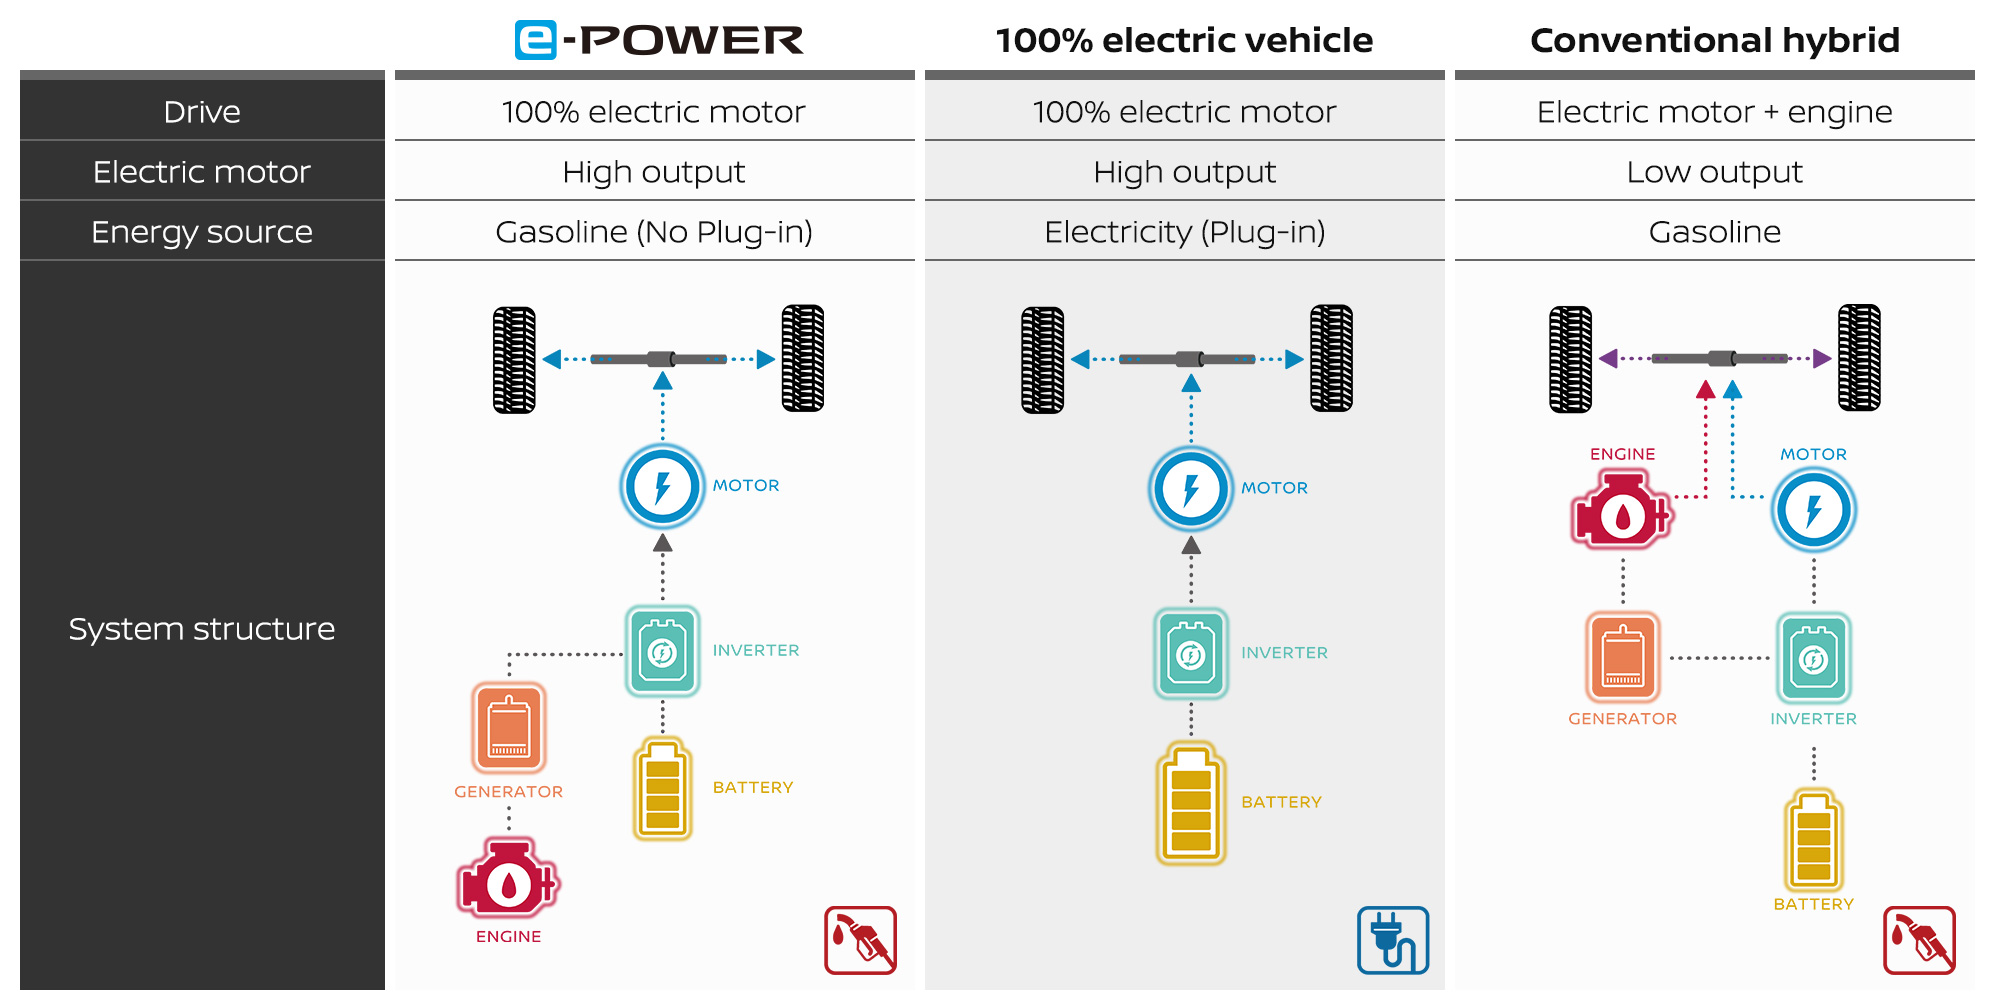 High-voltage e-motors and inverter systems